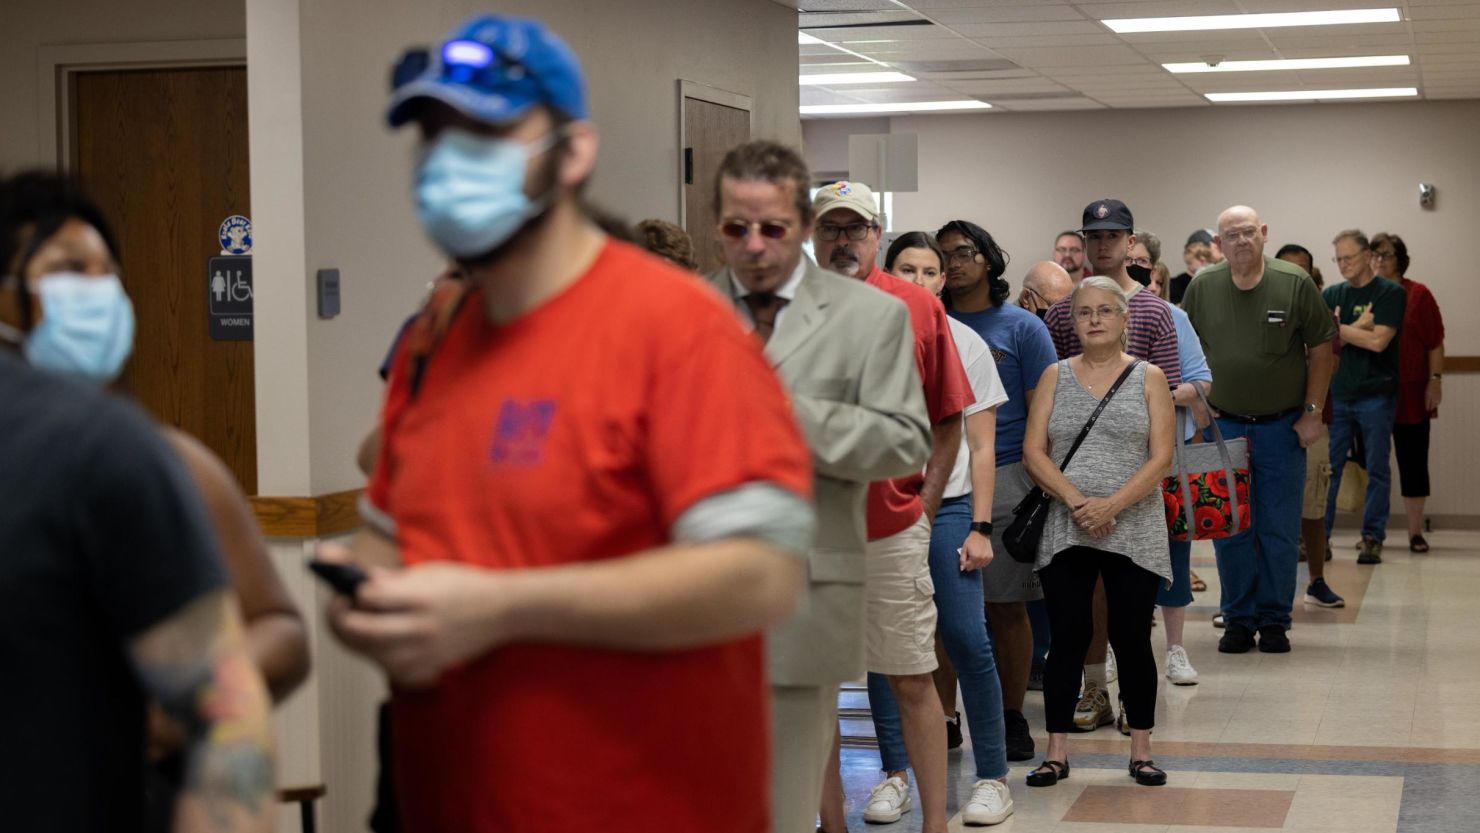 Voters wait in line at the Covenant Presbyterian Church in Wichita, Kansas on August 2, 2022. 